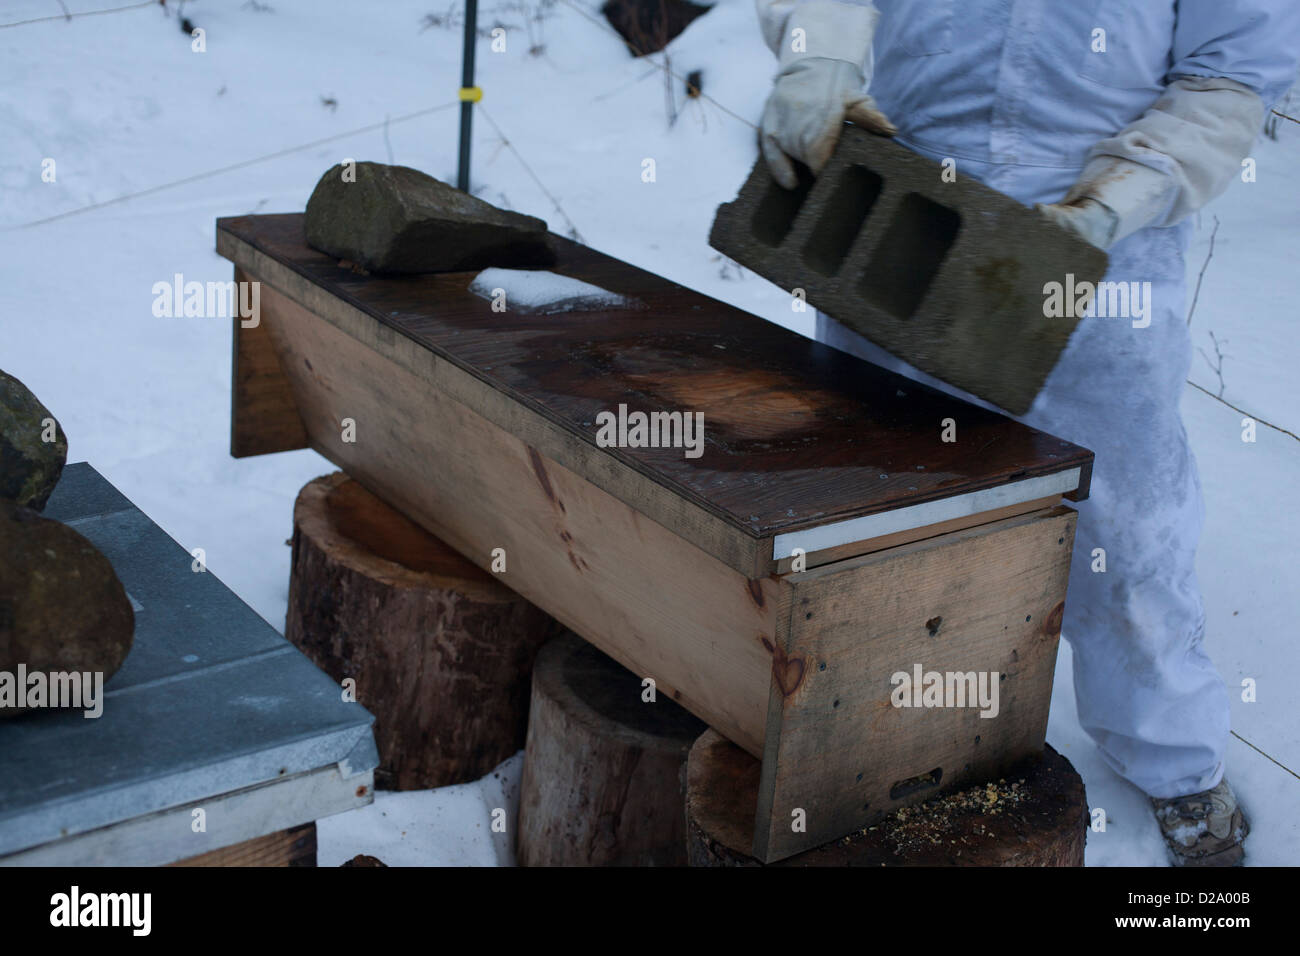 Woman bee keeper removes cement block used to weigh down top of top bar hive. Electric fence in rear used to keep bears away. Stock Photo